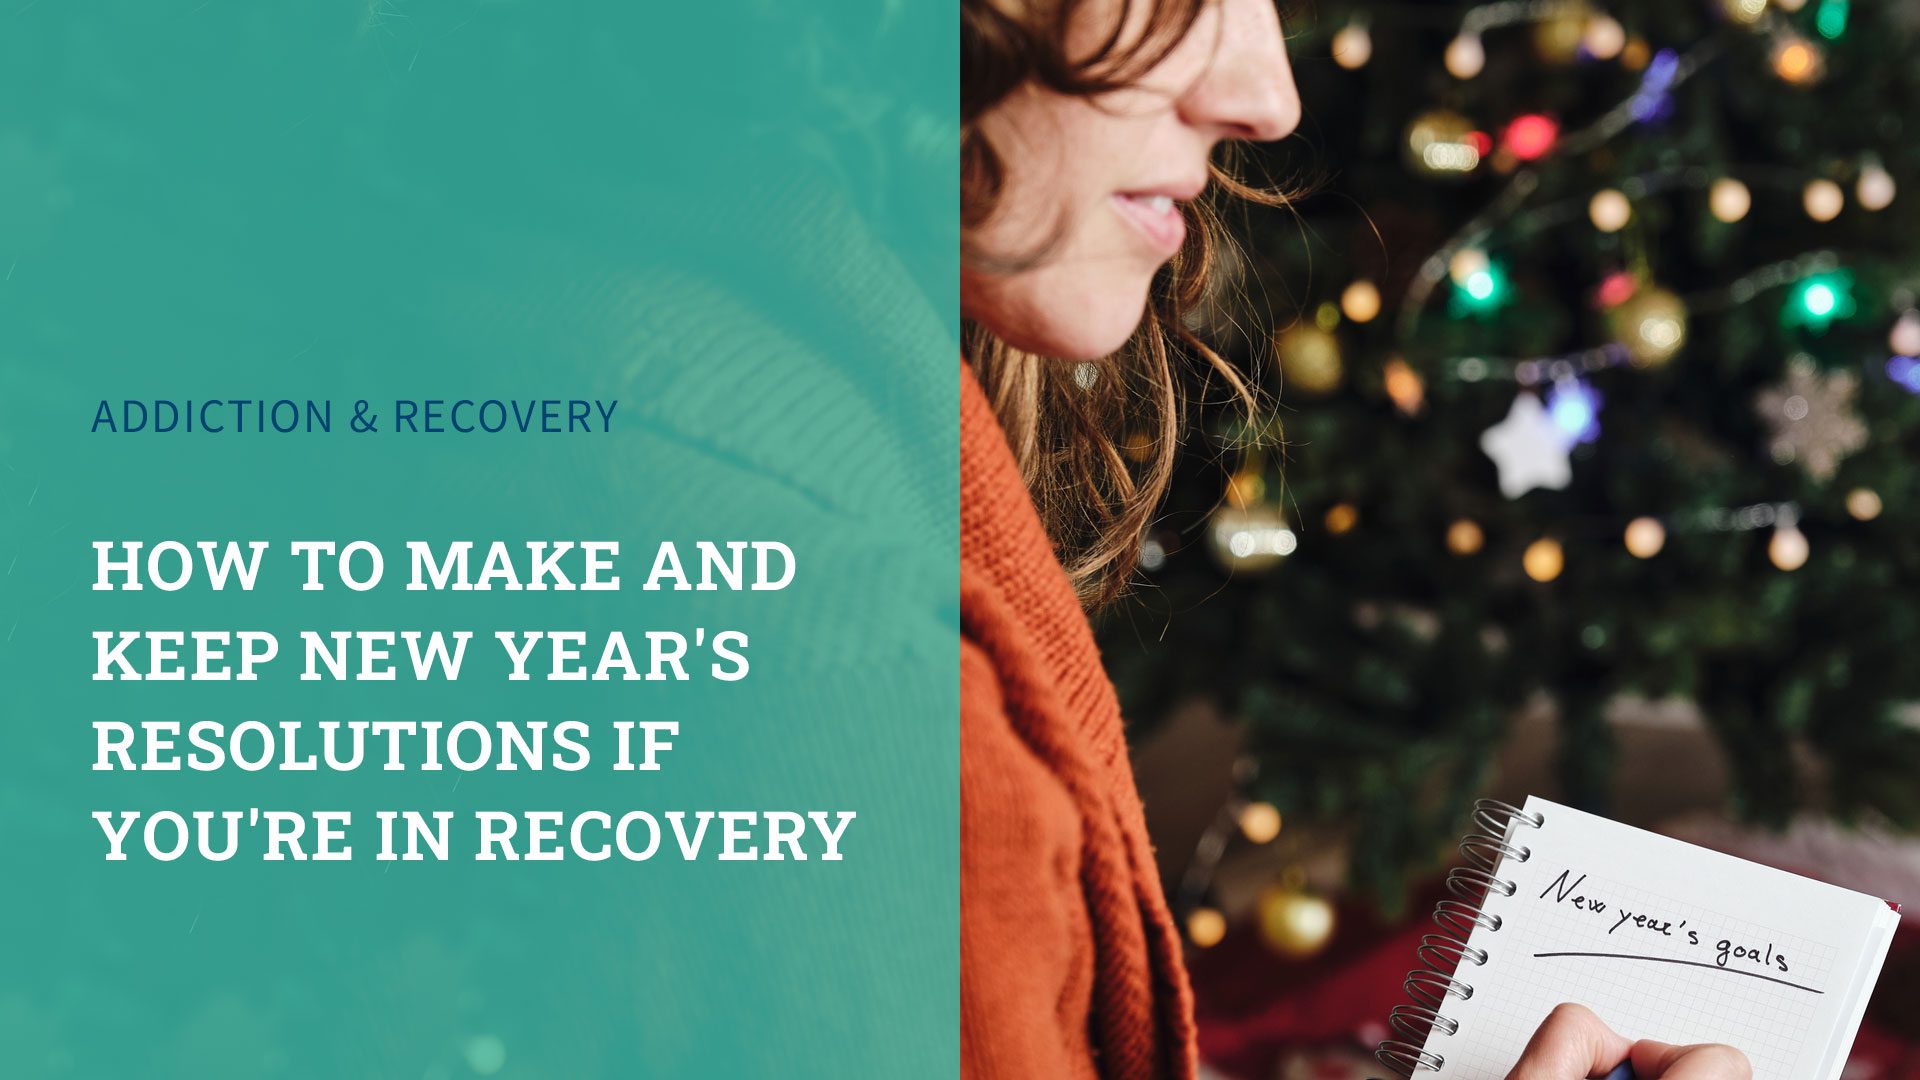 How to Make and Keep New Year’s Resolutions if You’re In Recovery